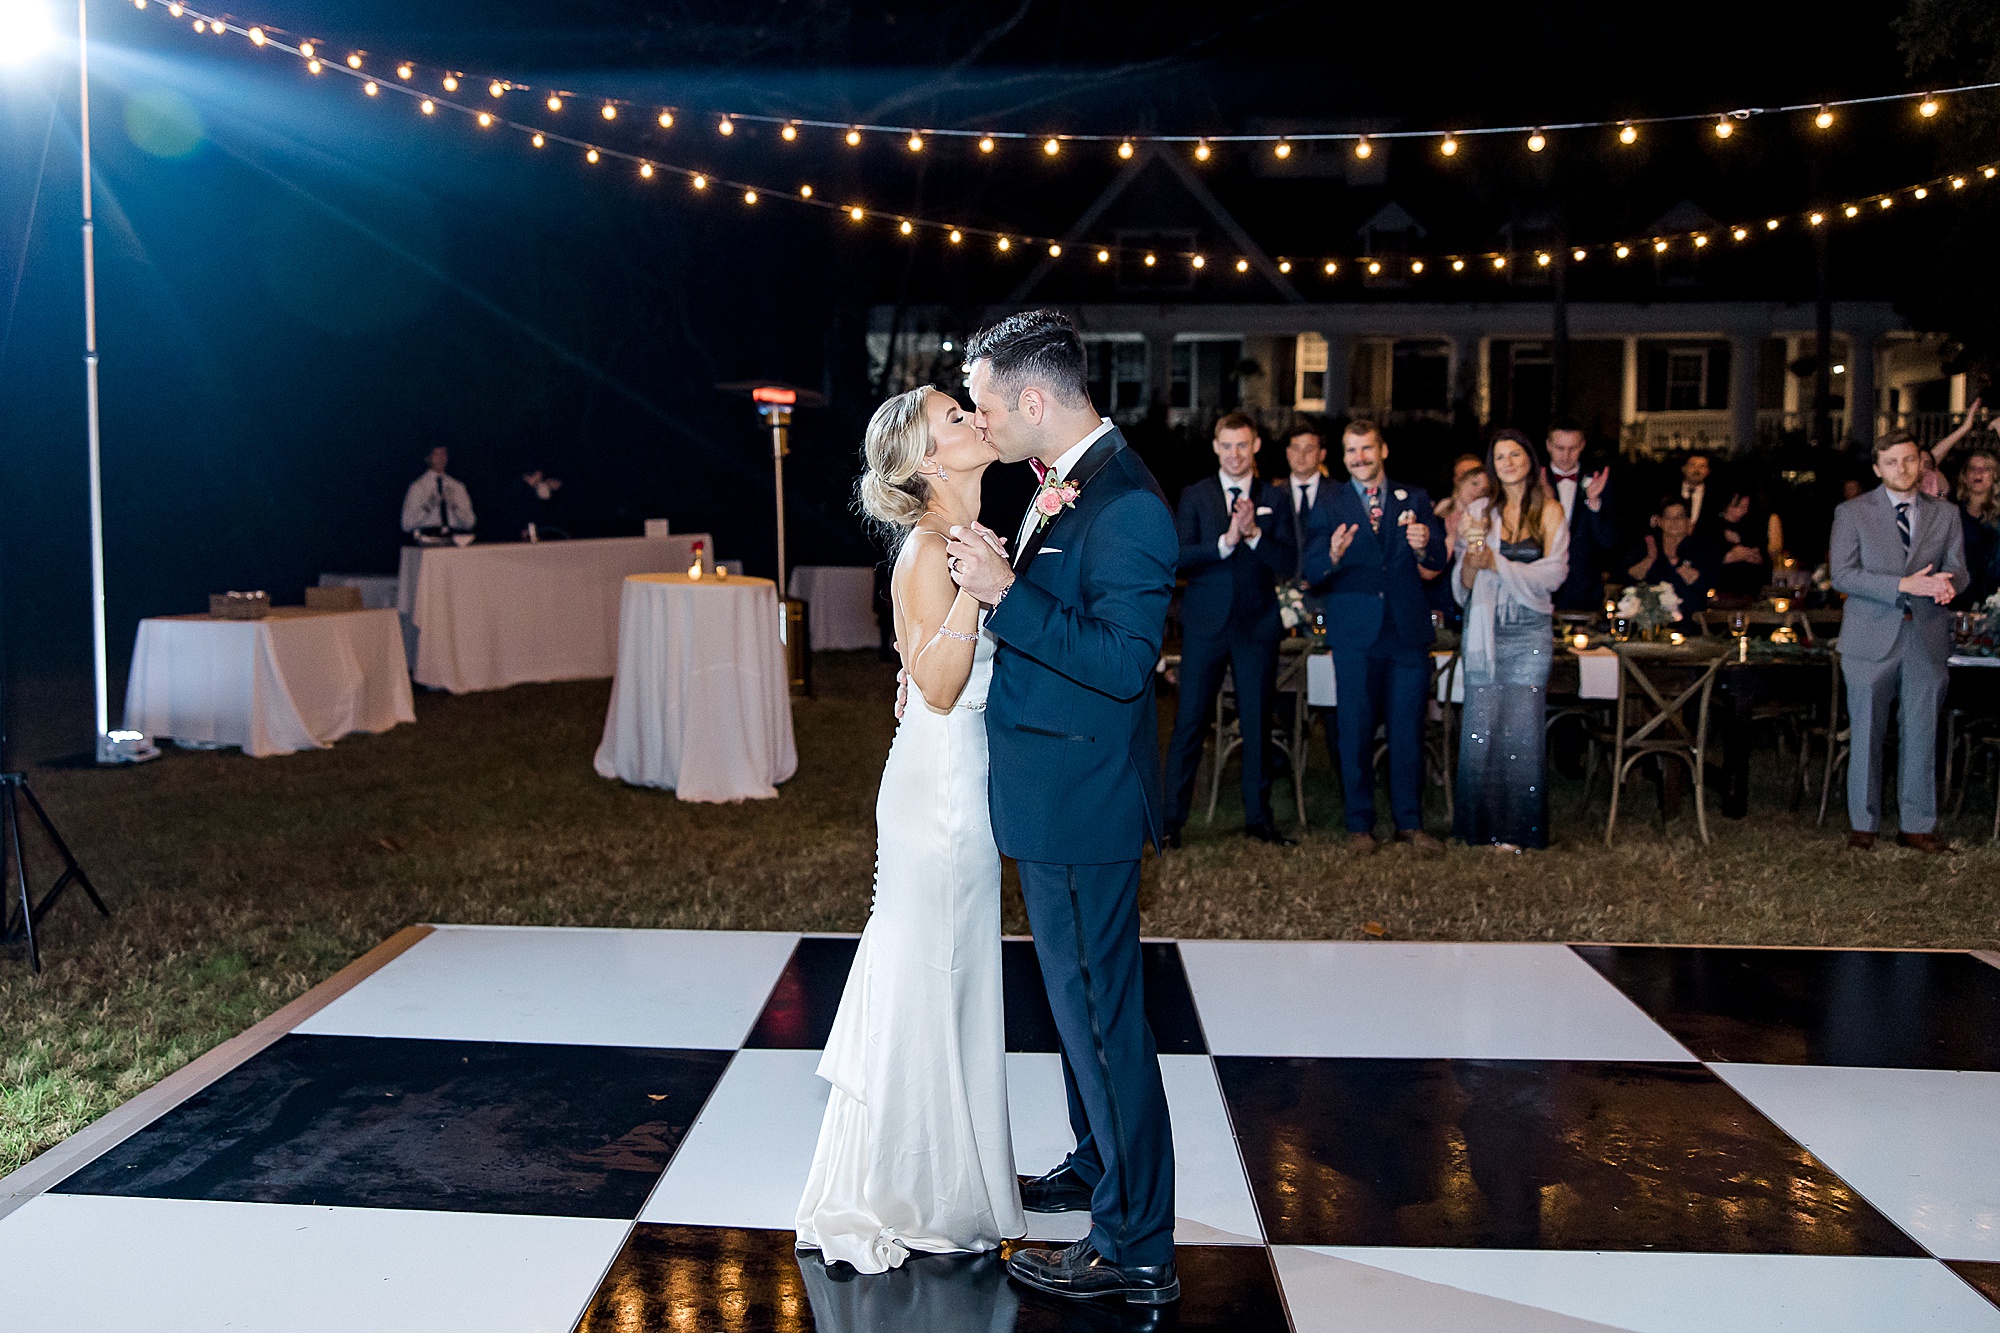 newlyweds dance to their first song together